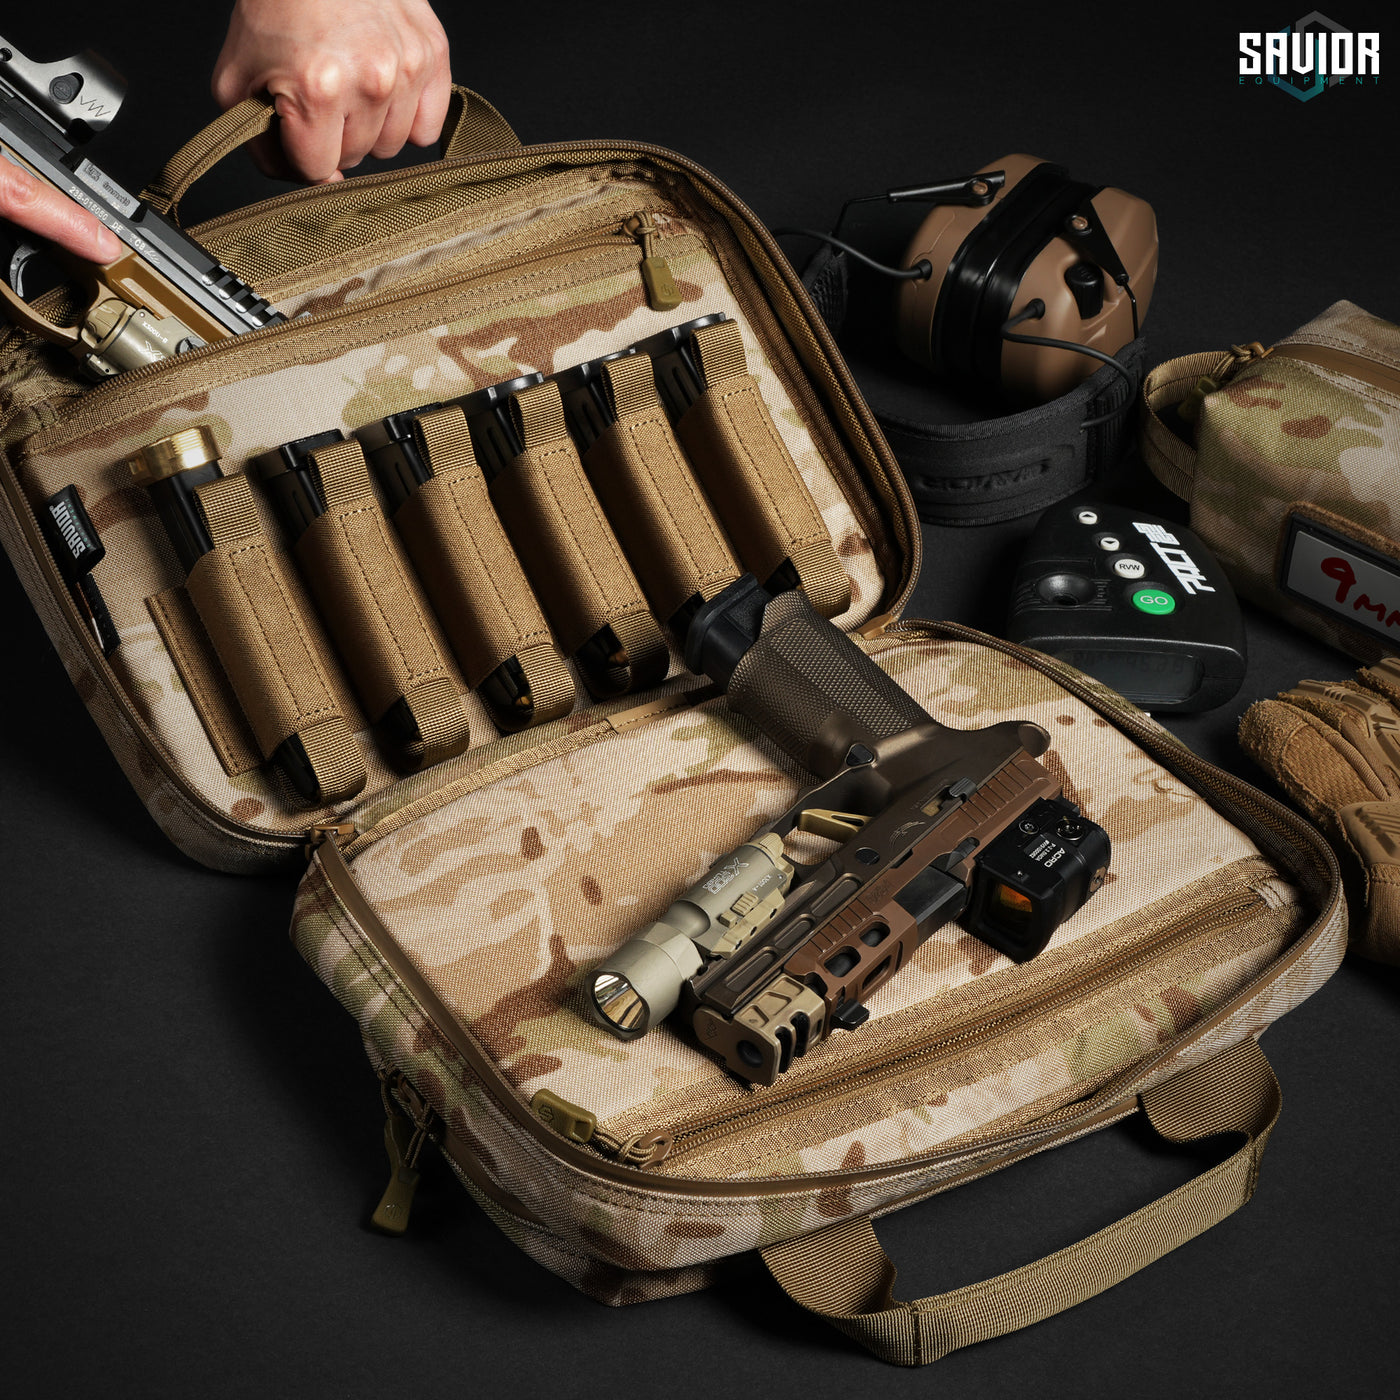 Comfortably Designed - Interally lined with 1000D Cordura fabric, the two compartments will keep your pistols snug with its soft-touch cushioning. Firearms & accessories shown not included.